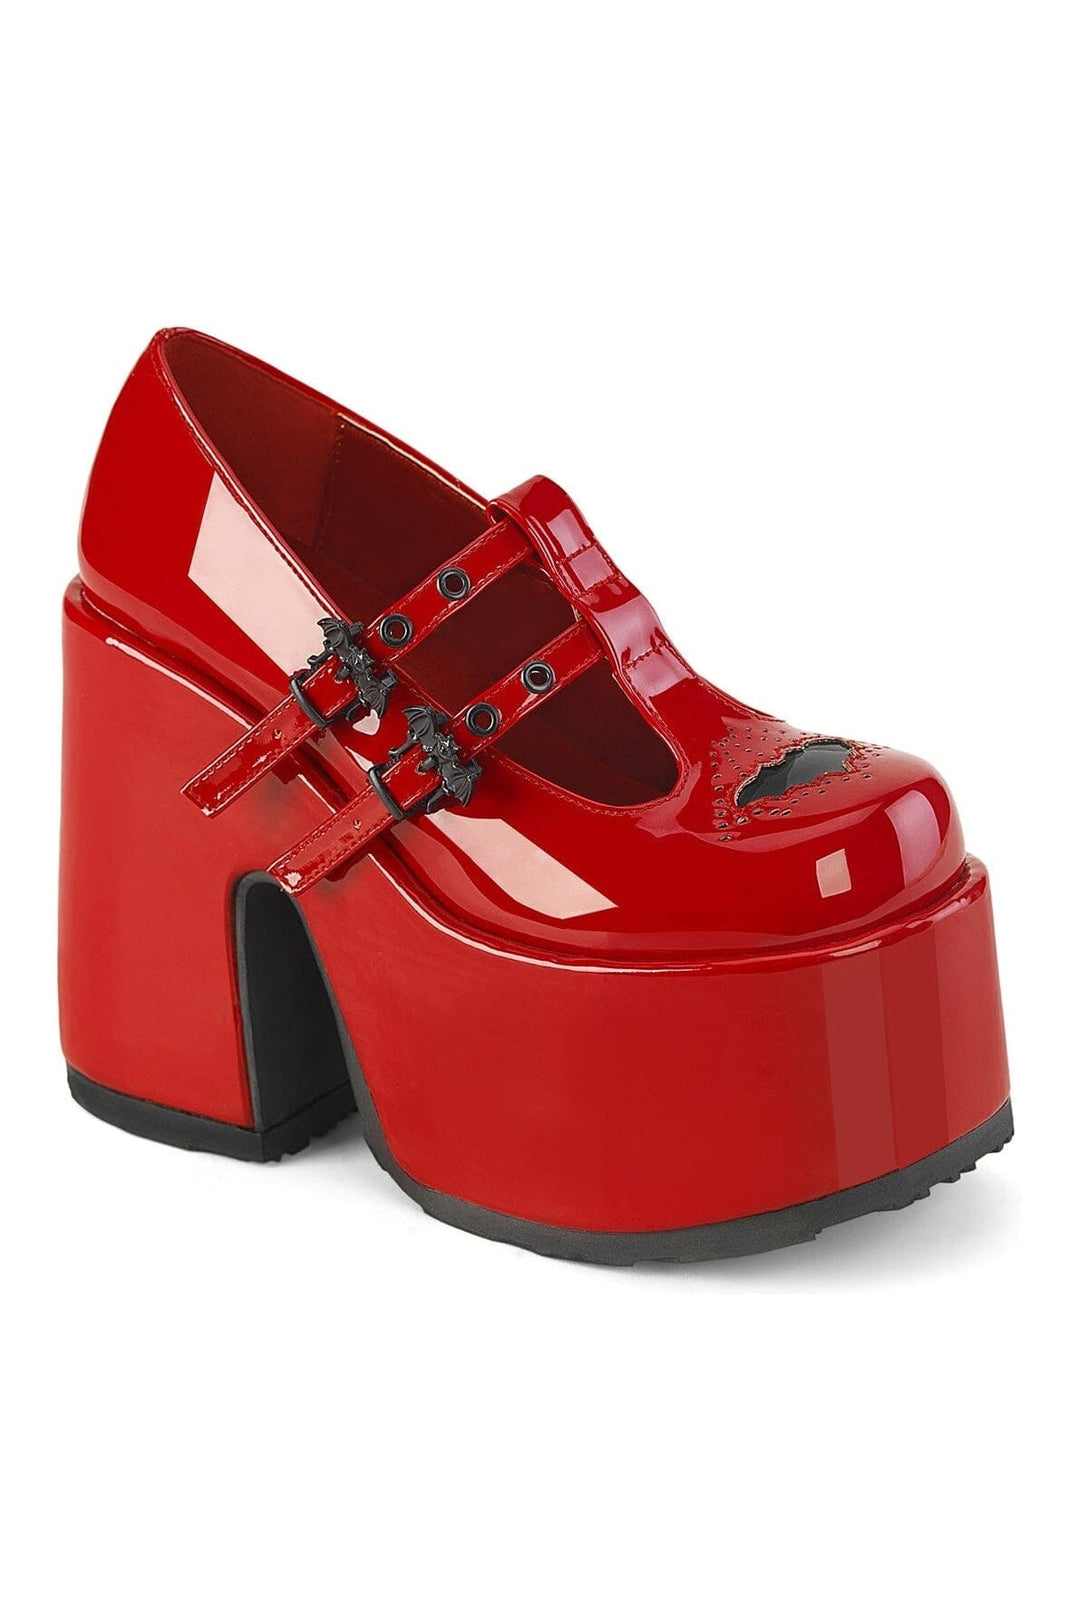 CAMEL-55 Red Patent Mary Janes-Mary Janes-Demonia-Red-10-Patent-SEXYSHOES.COM